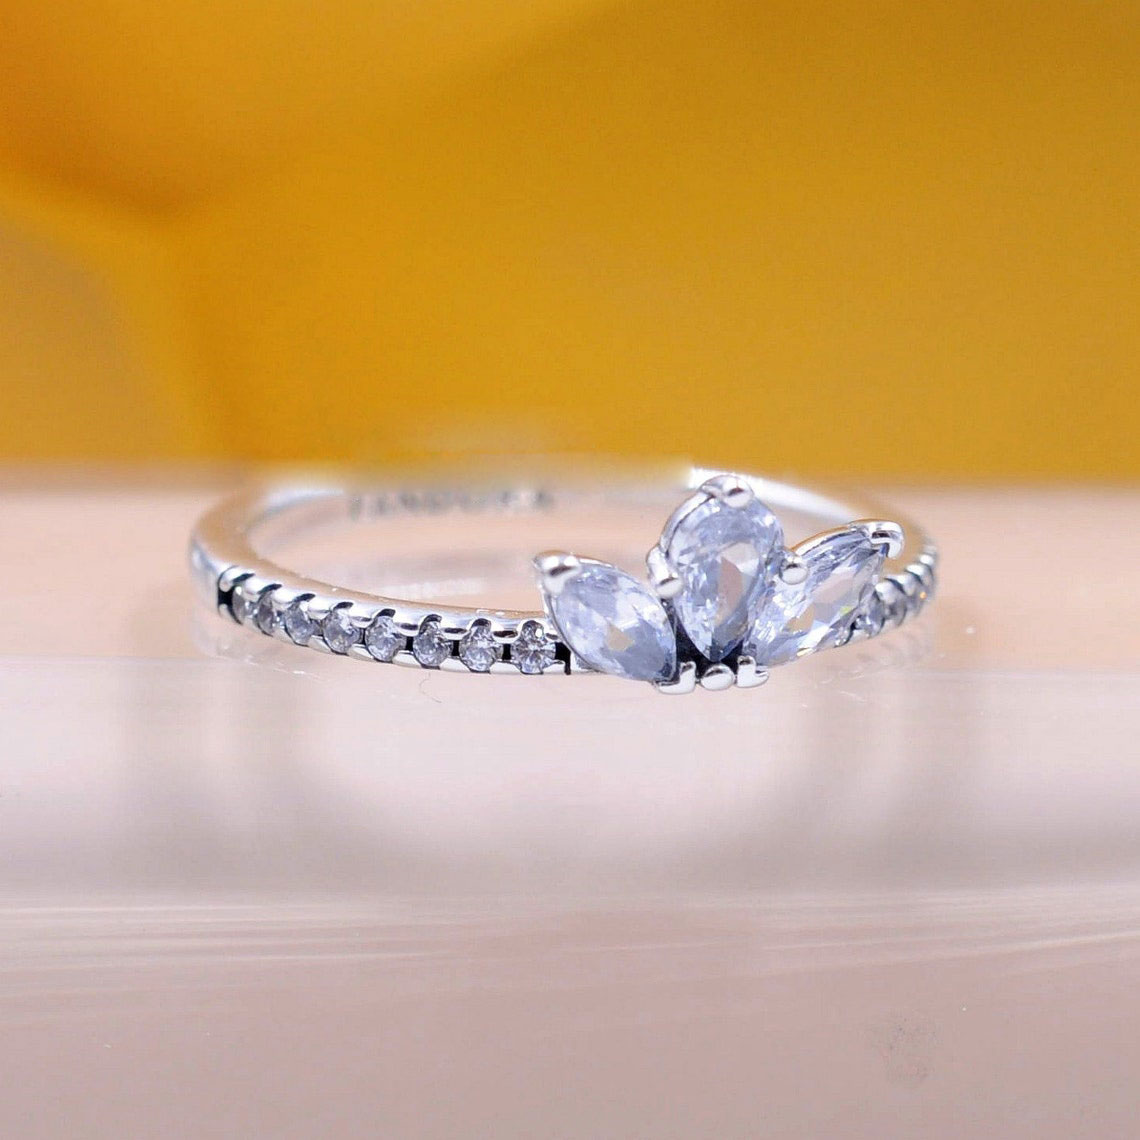 925 Sterling Silver Sparkling Herbarium Cluster Ring Fit P Jewelry Engagement Wedding Lovers Fashion Ring for Women4882098